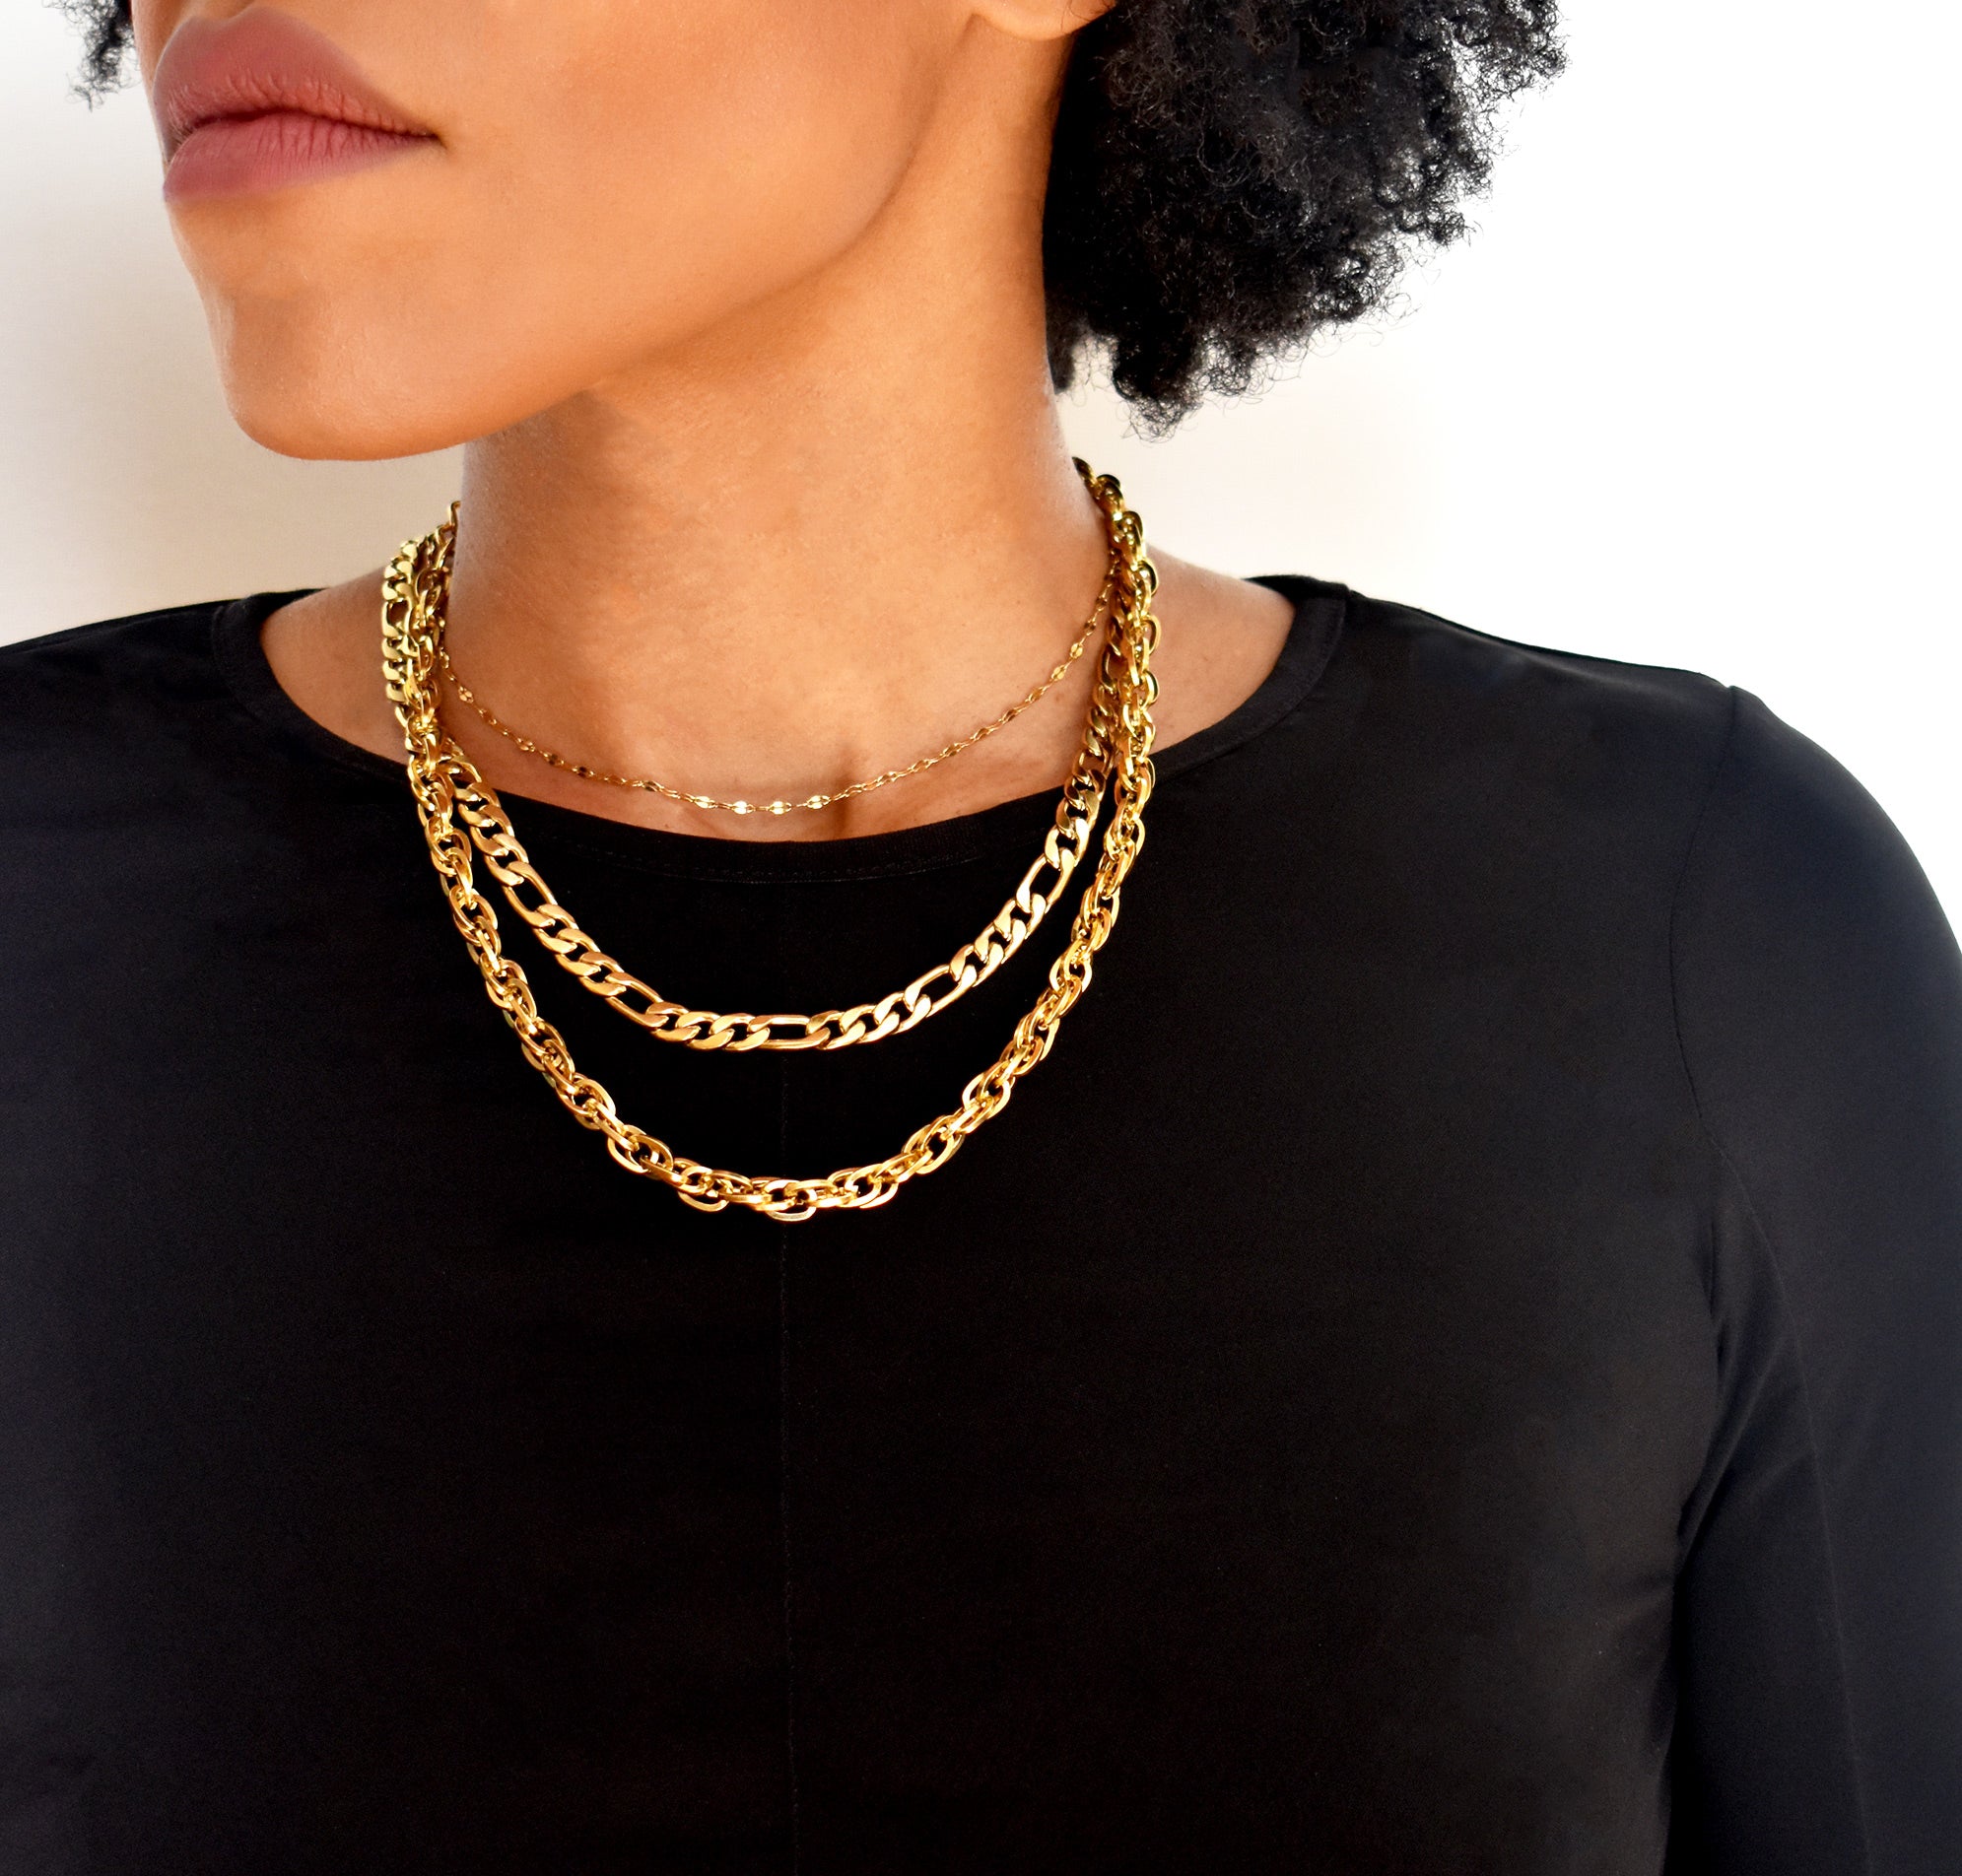 GEMMA GOLD ROPE CHAIN NECKLACE